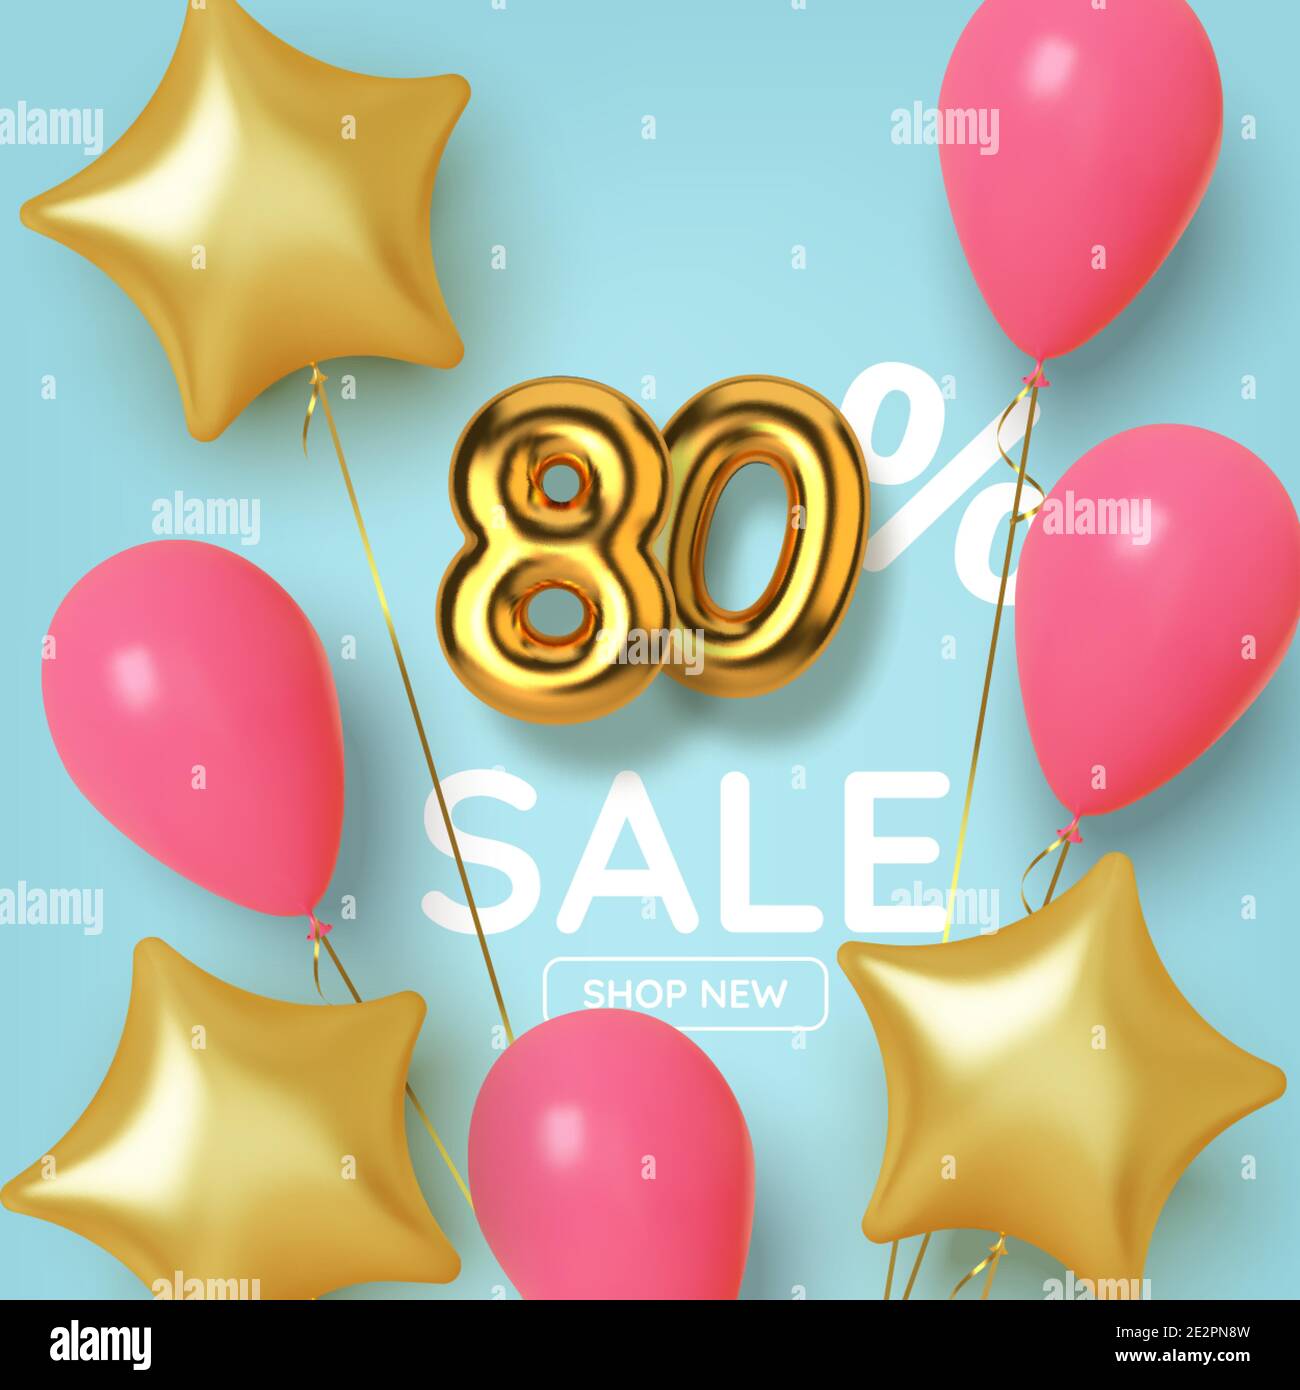 80 off discount promotion sale made of realistic 3d gold number with balloons and stars. Number in the form of golden balloons. Vector Stock Vector